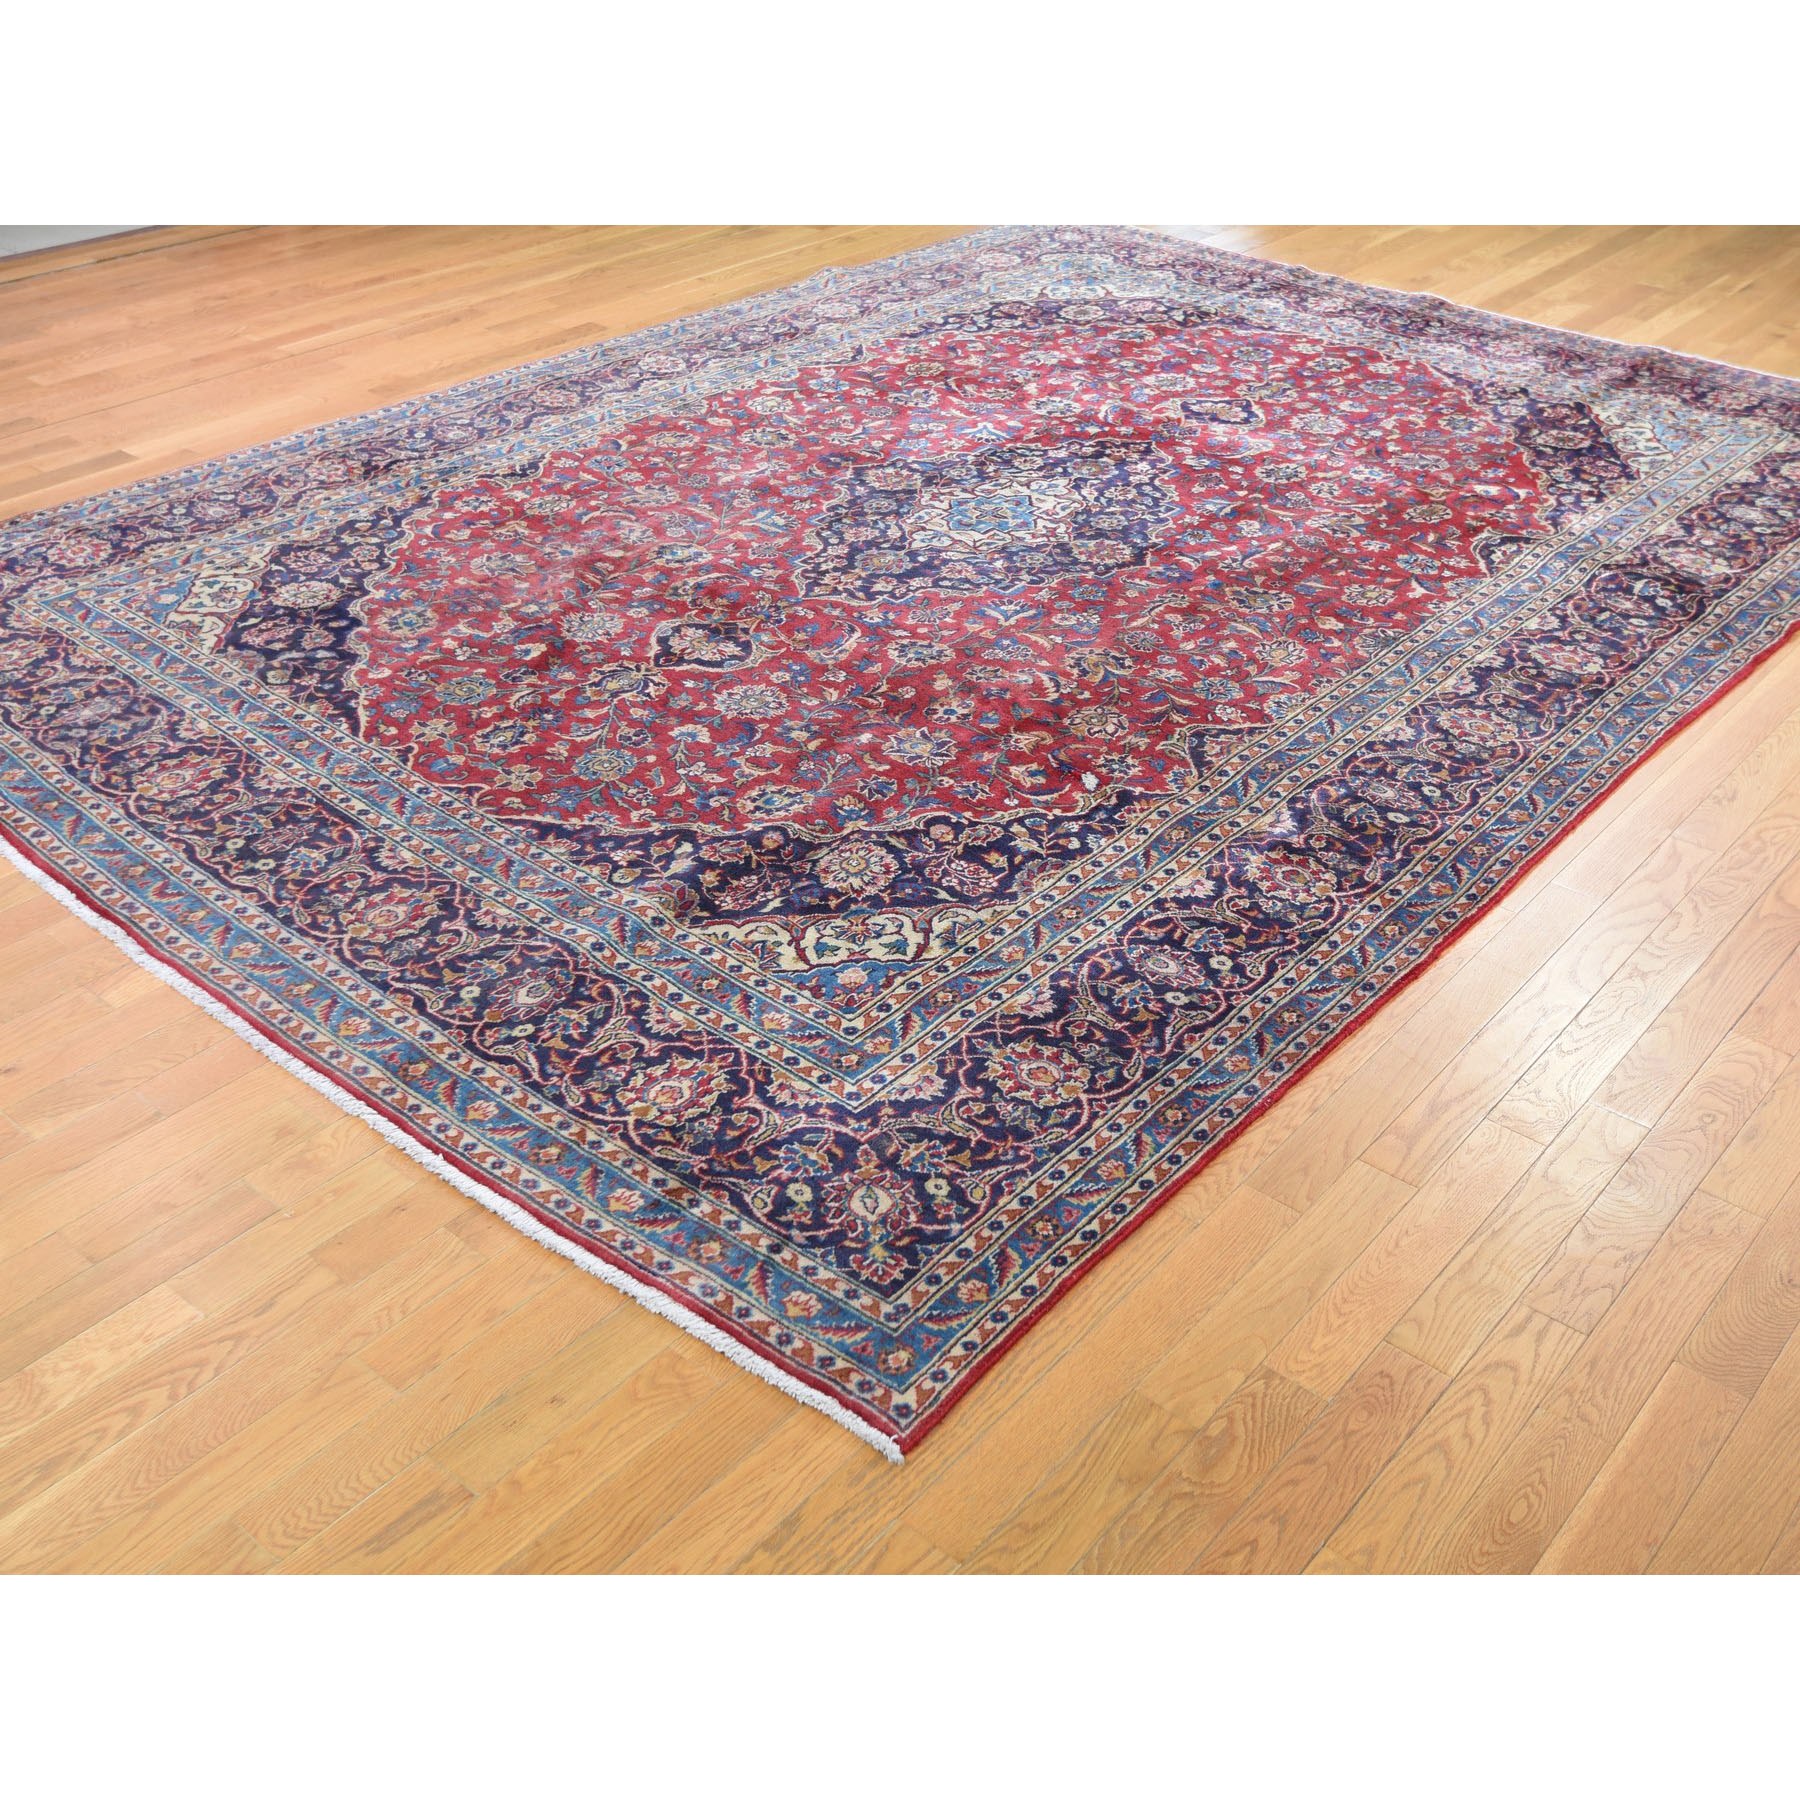 9-6 x13-2  Red Semi Antique Persian Kashan Full Pile Pure Wool Hand Knotted Oriental Rug 